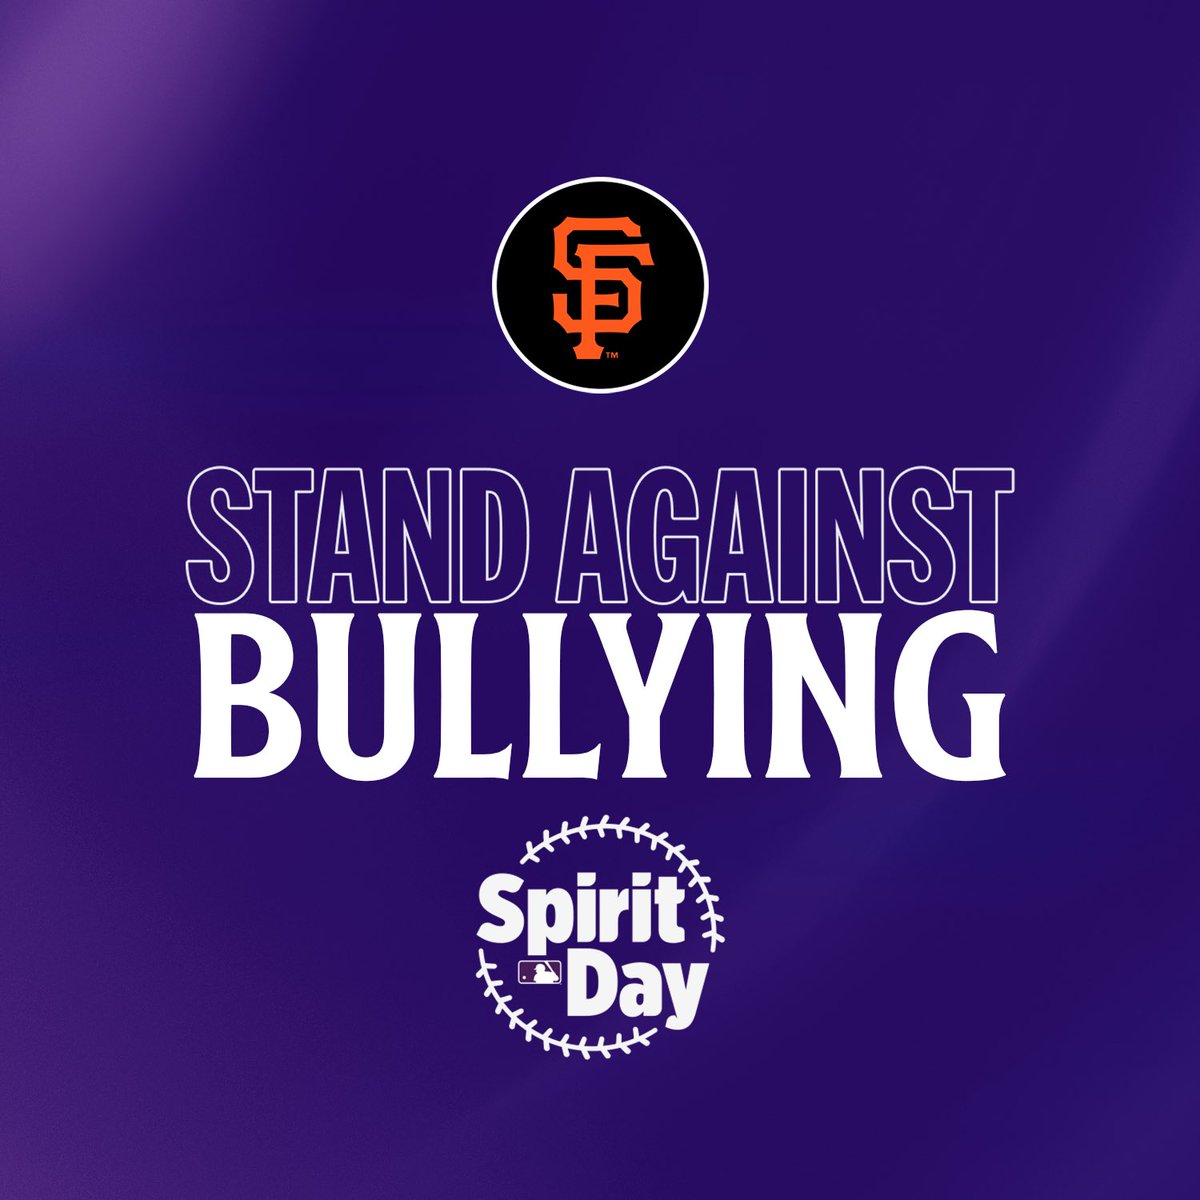 On #SpiritDay and every day, the #SFGiants are proud to take a stand against bullying and support LGBTQ+ youth.